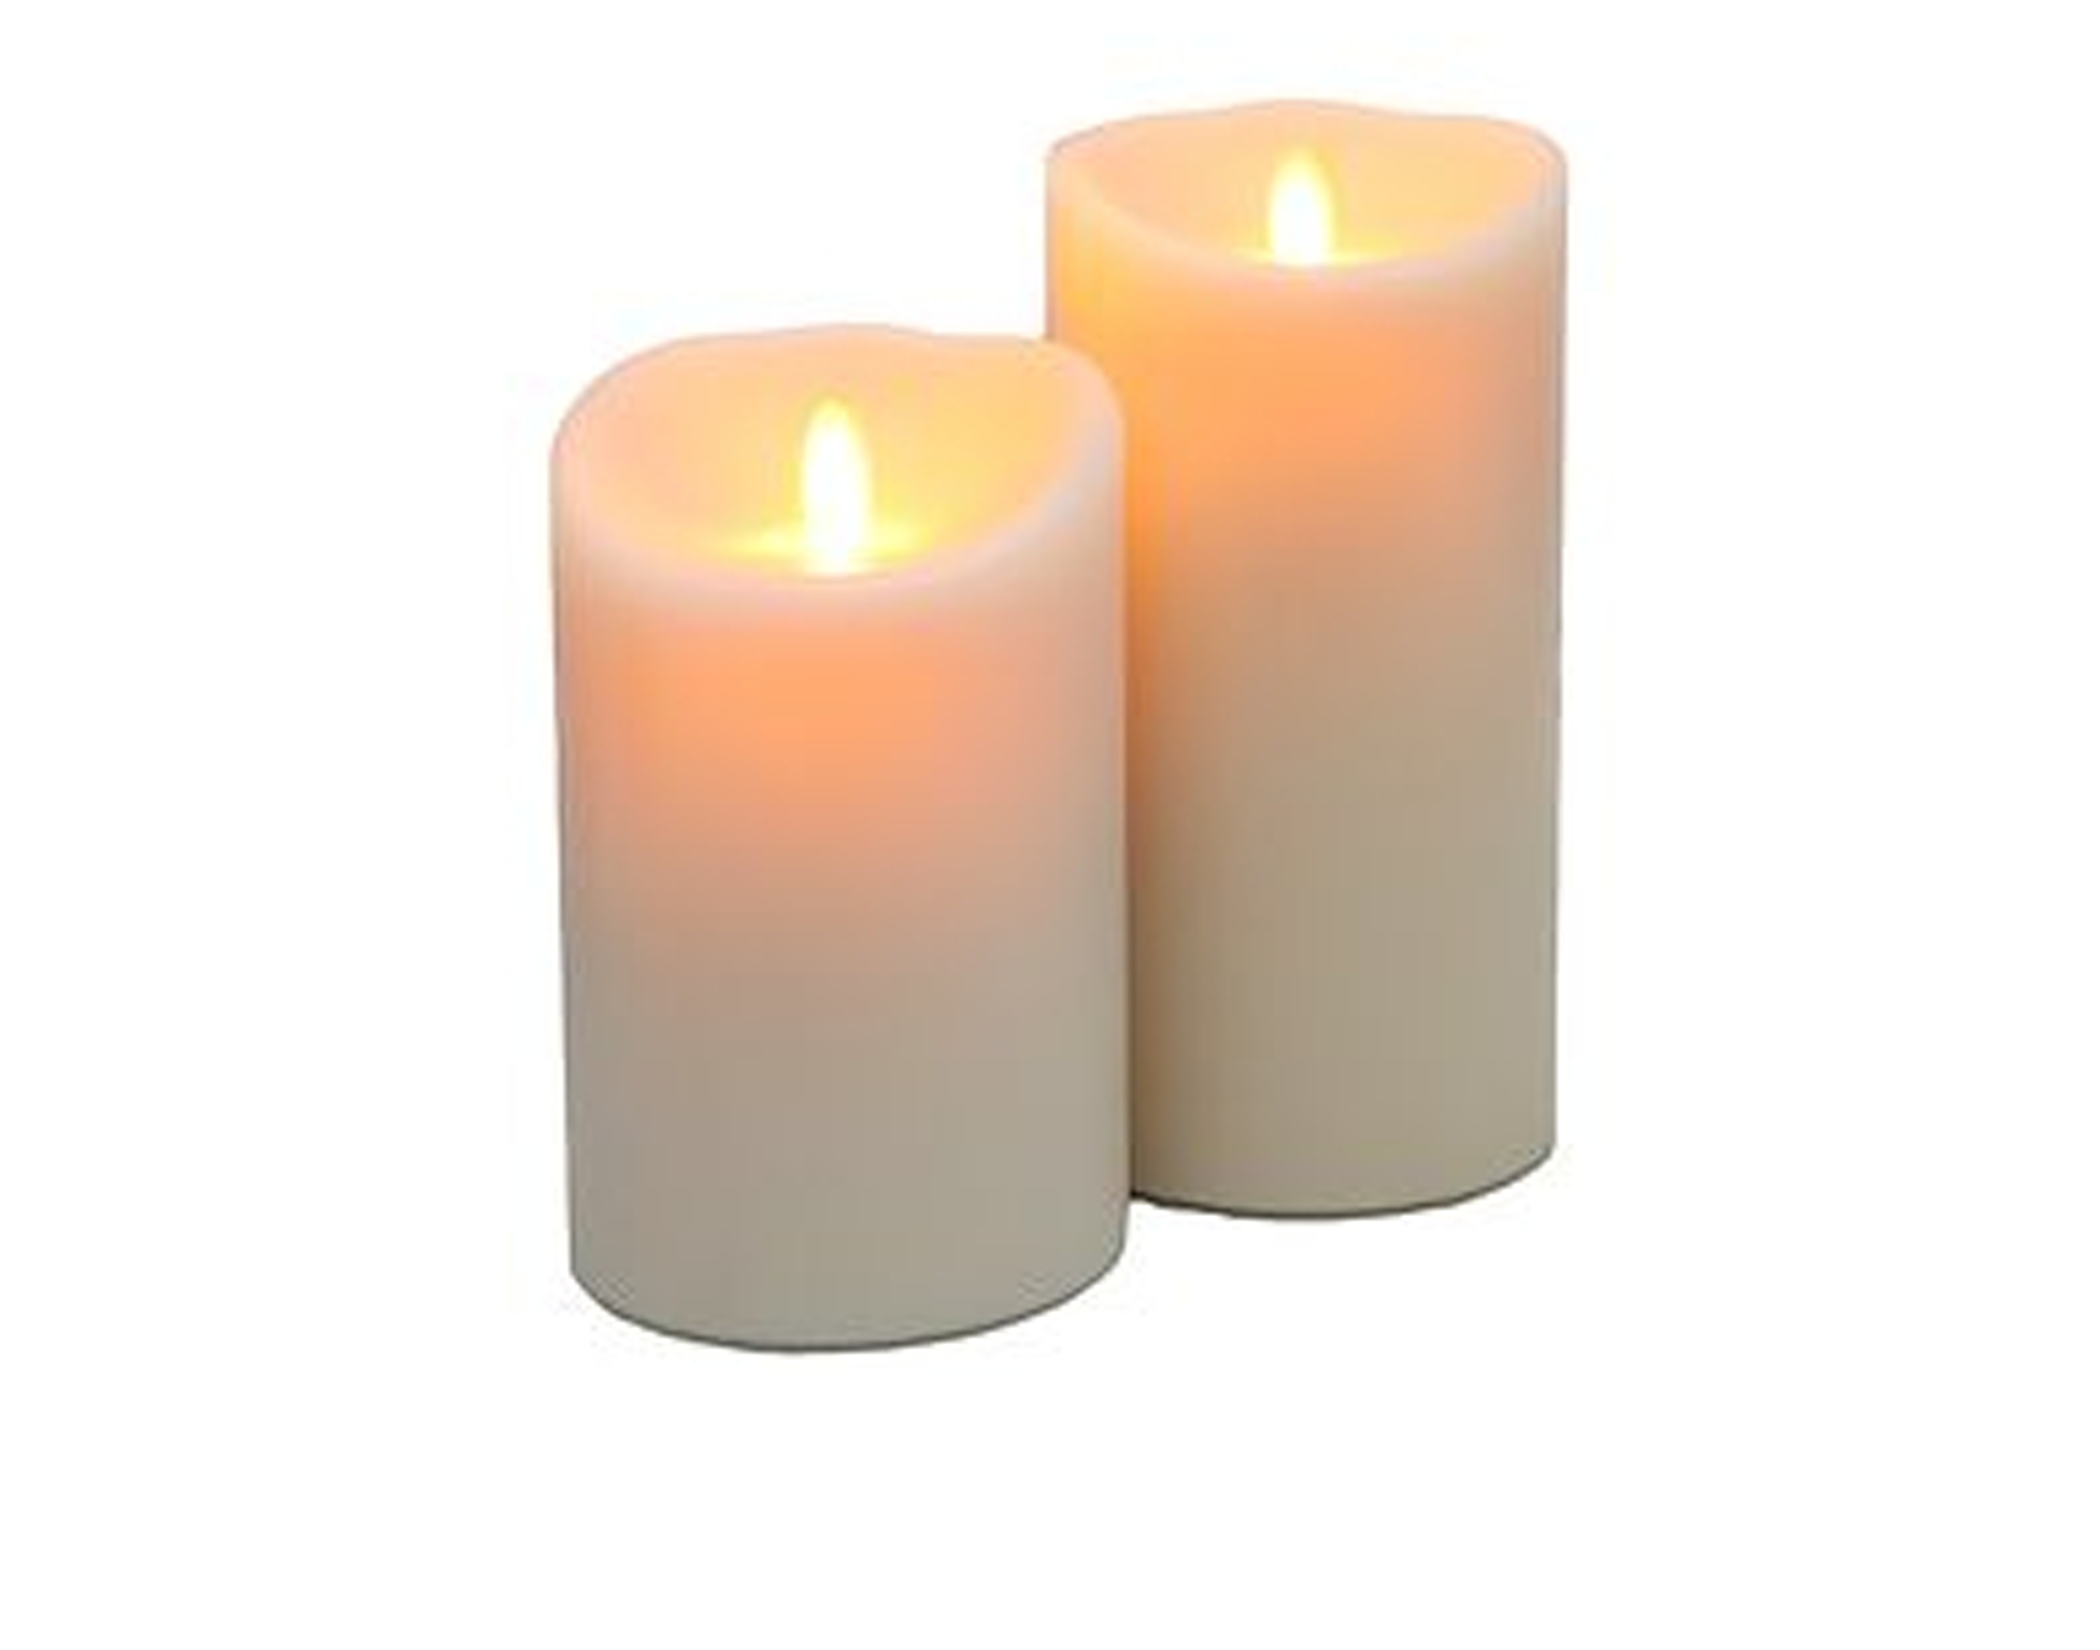 Candle  PNG HD-PlusPNG.com-51